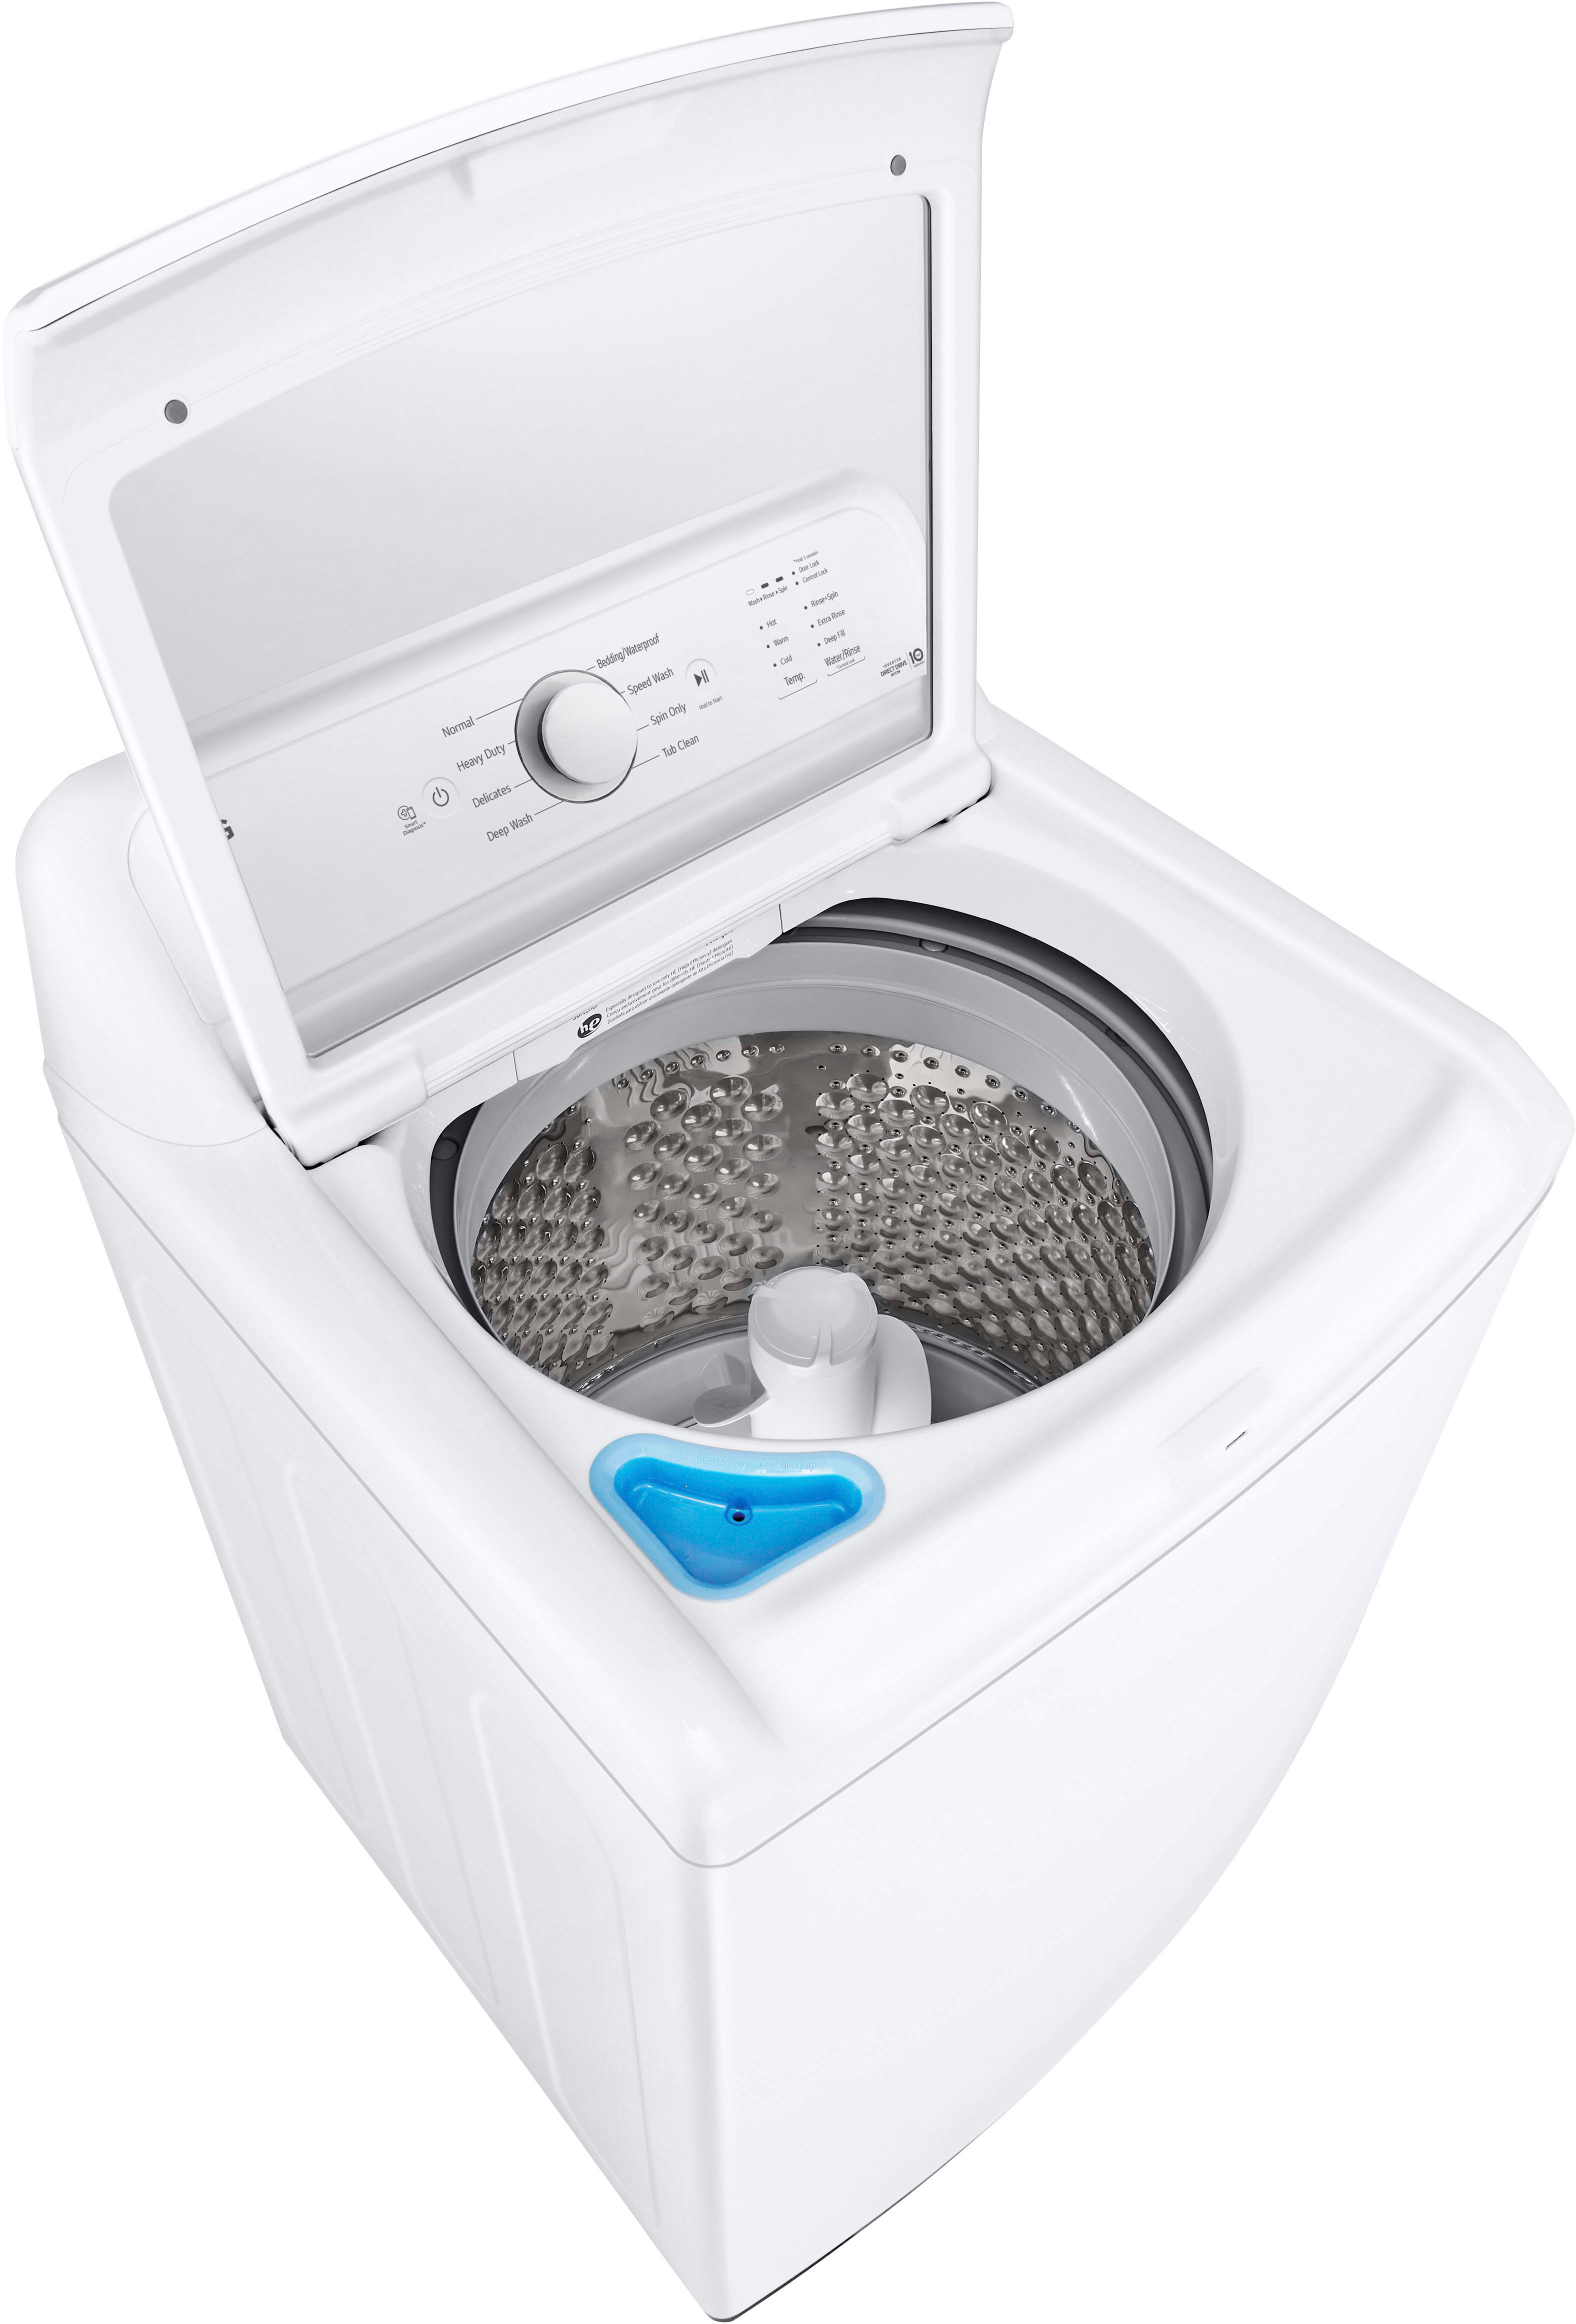 LG 4.1 Cu. Ft. Top Washer SlamProof Load - Buy with Glass Best White Lid WT6105CW